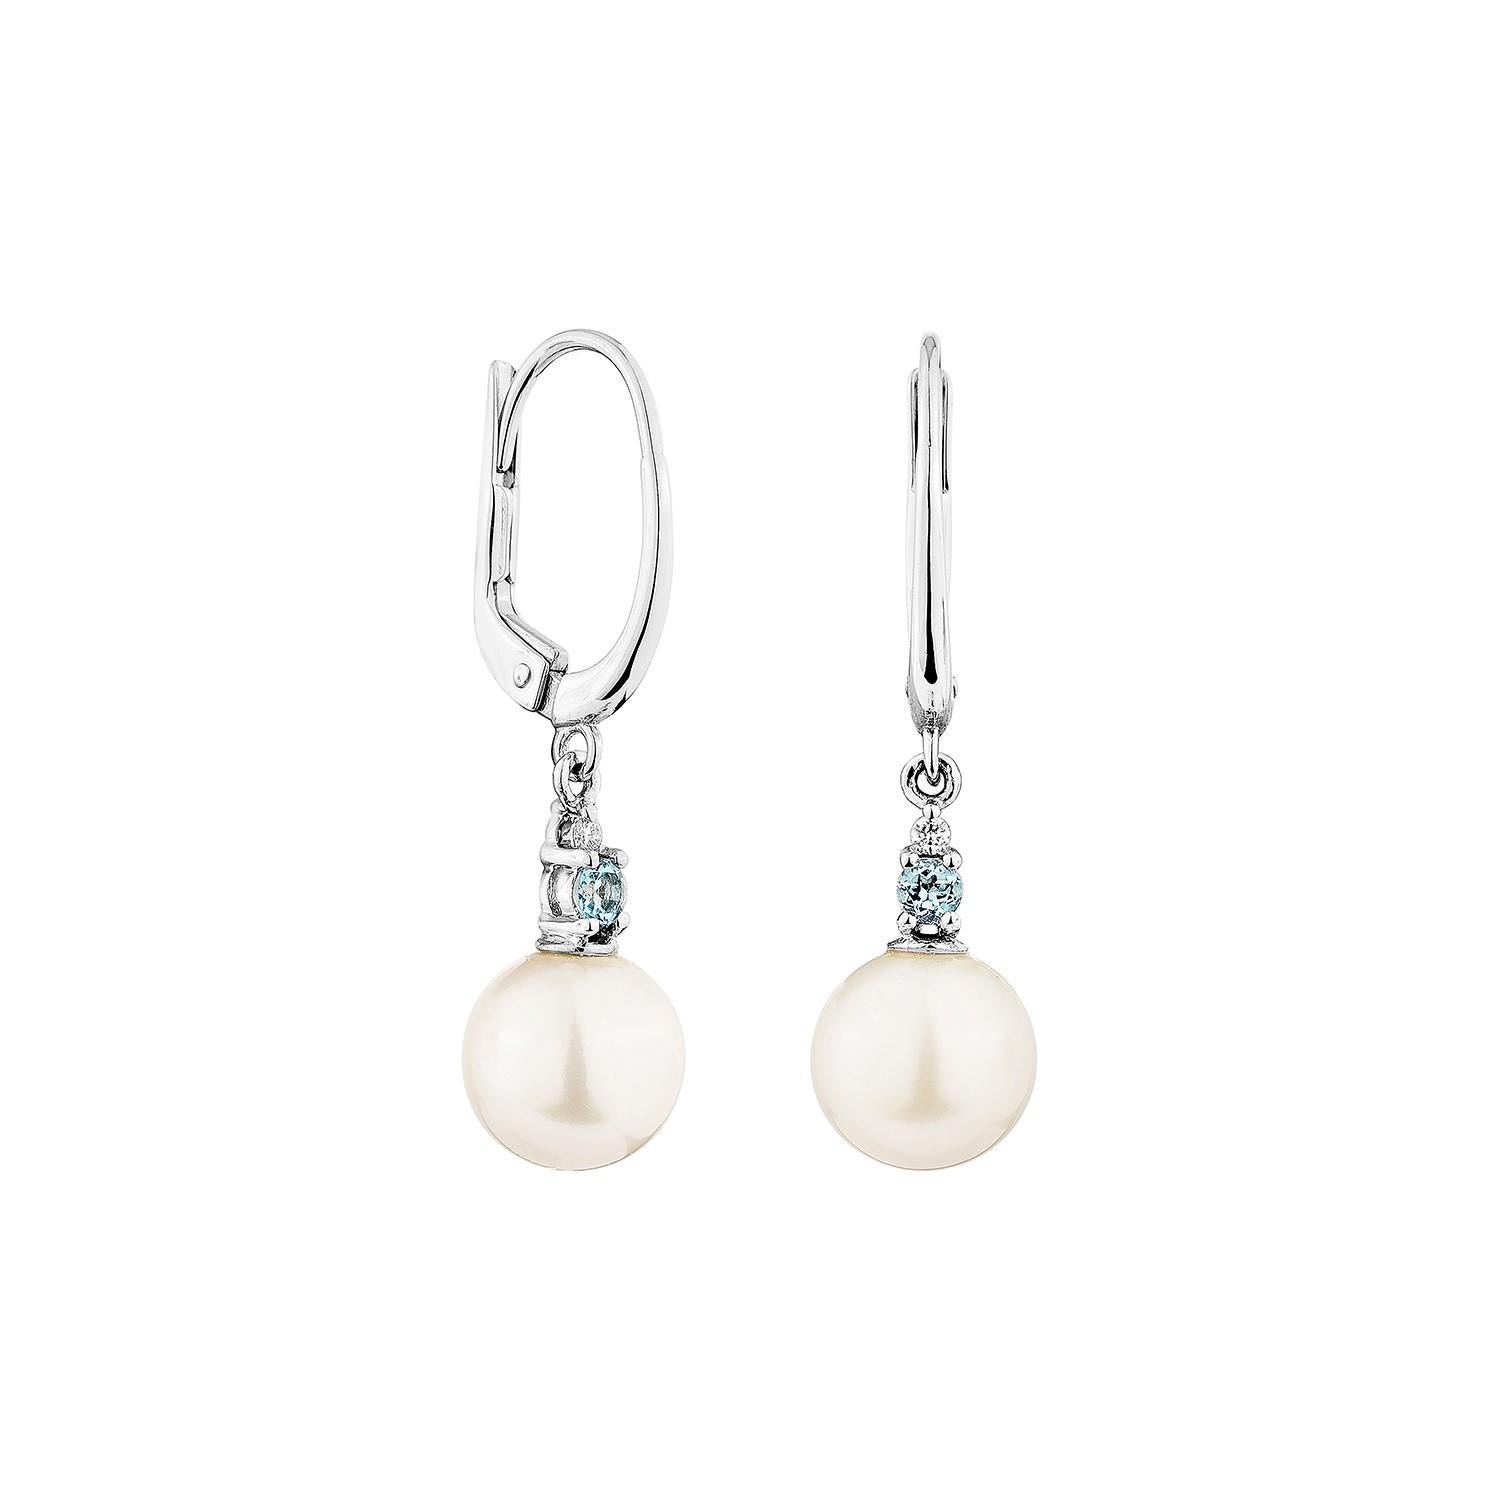 Presented A lovely White pearl and Swiss Blue Topaz Fancy Earring is perfect for people who value quality and want to wear it to any occasion or celebration. The White gold White pearl Earrings adorned with Citrine and White diamond offer a classic